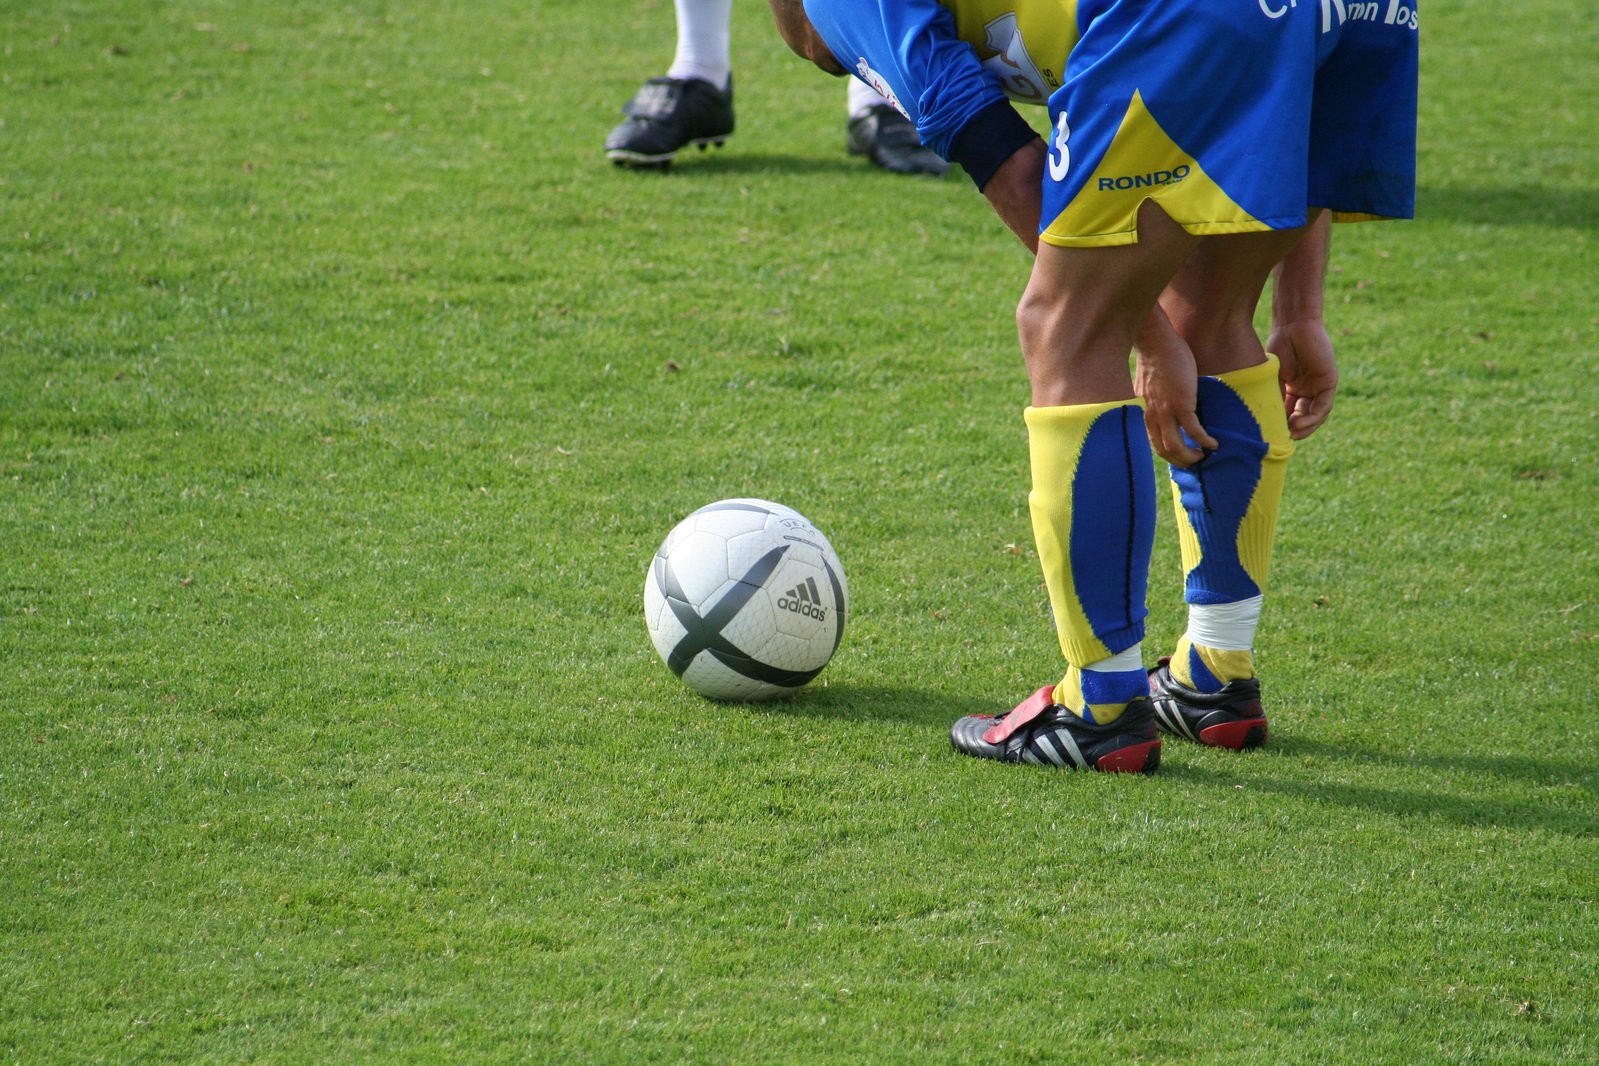 two soccer players from the opposing teams standing near the soccer ball